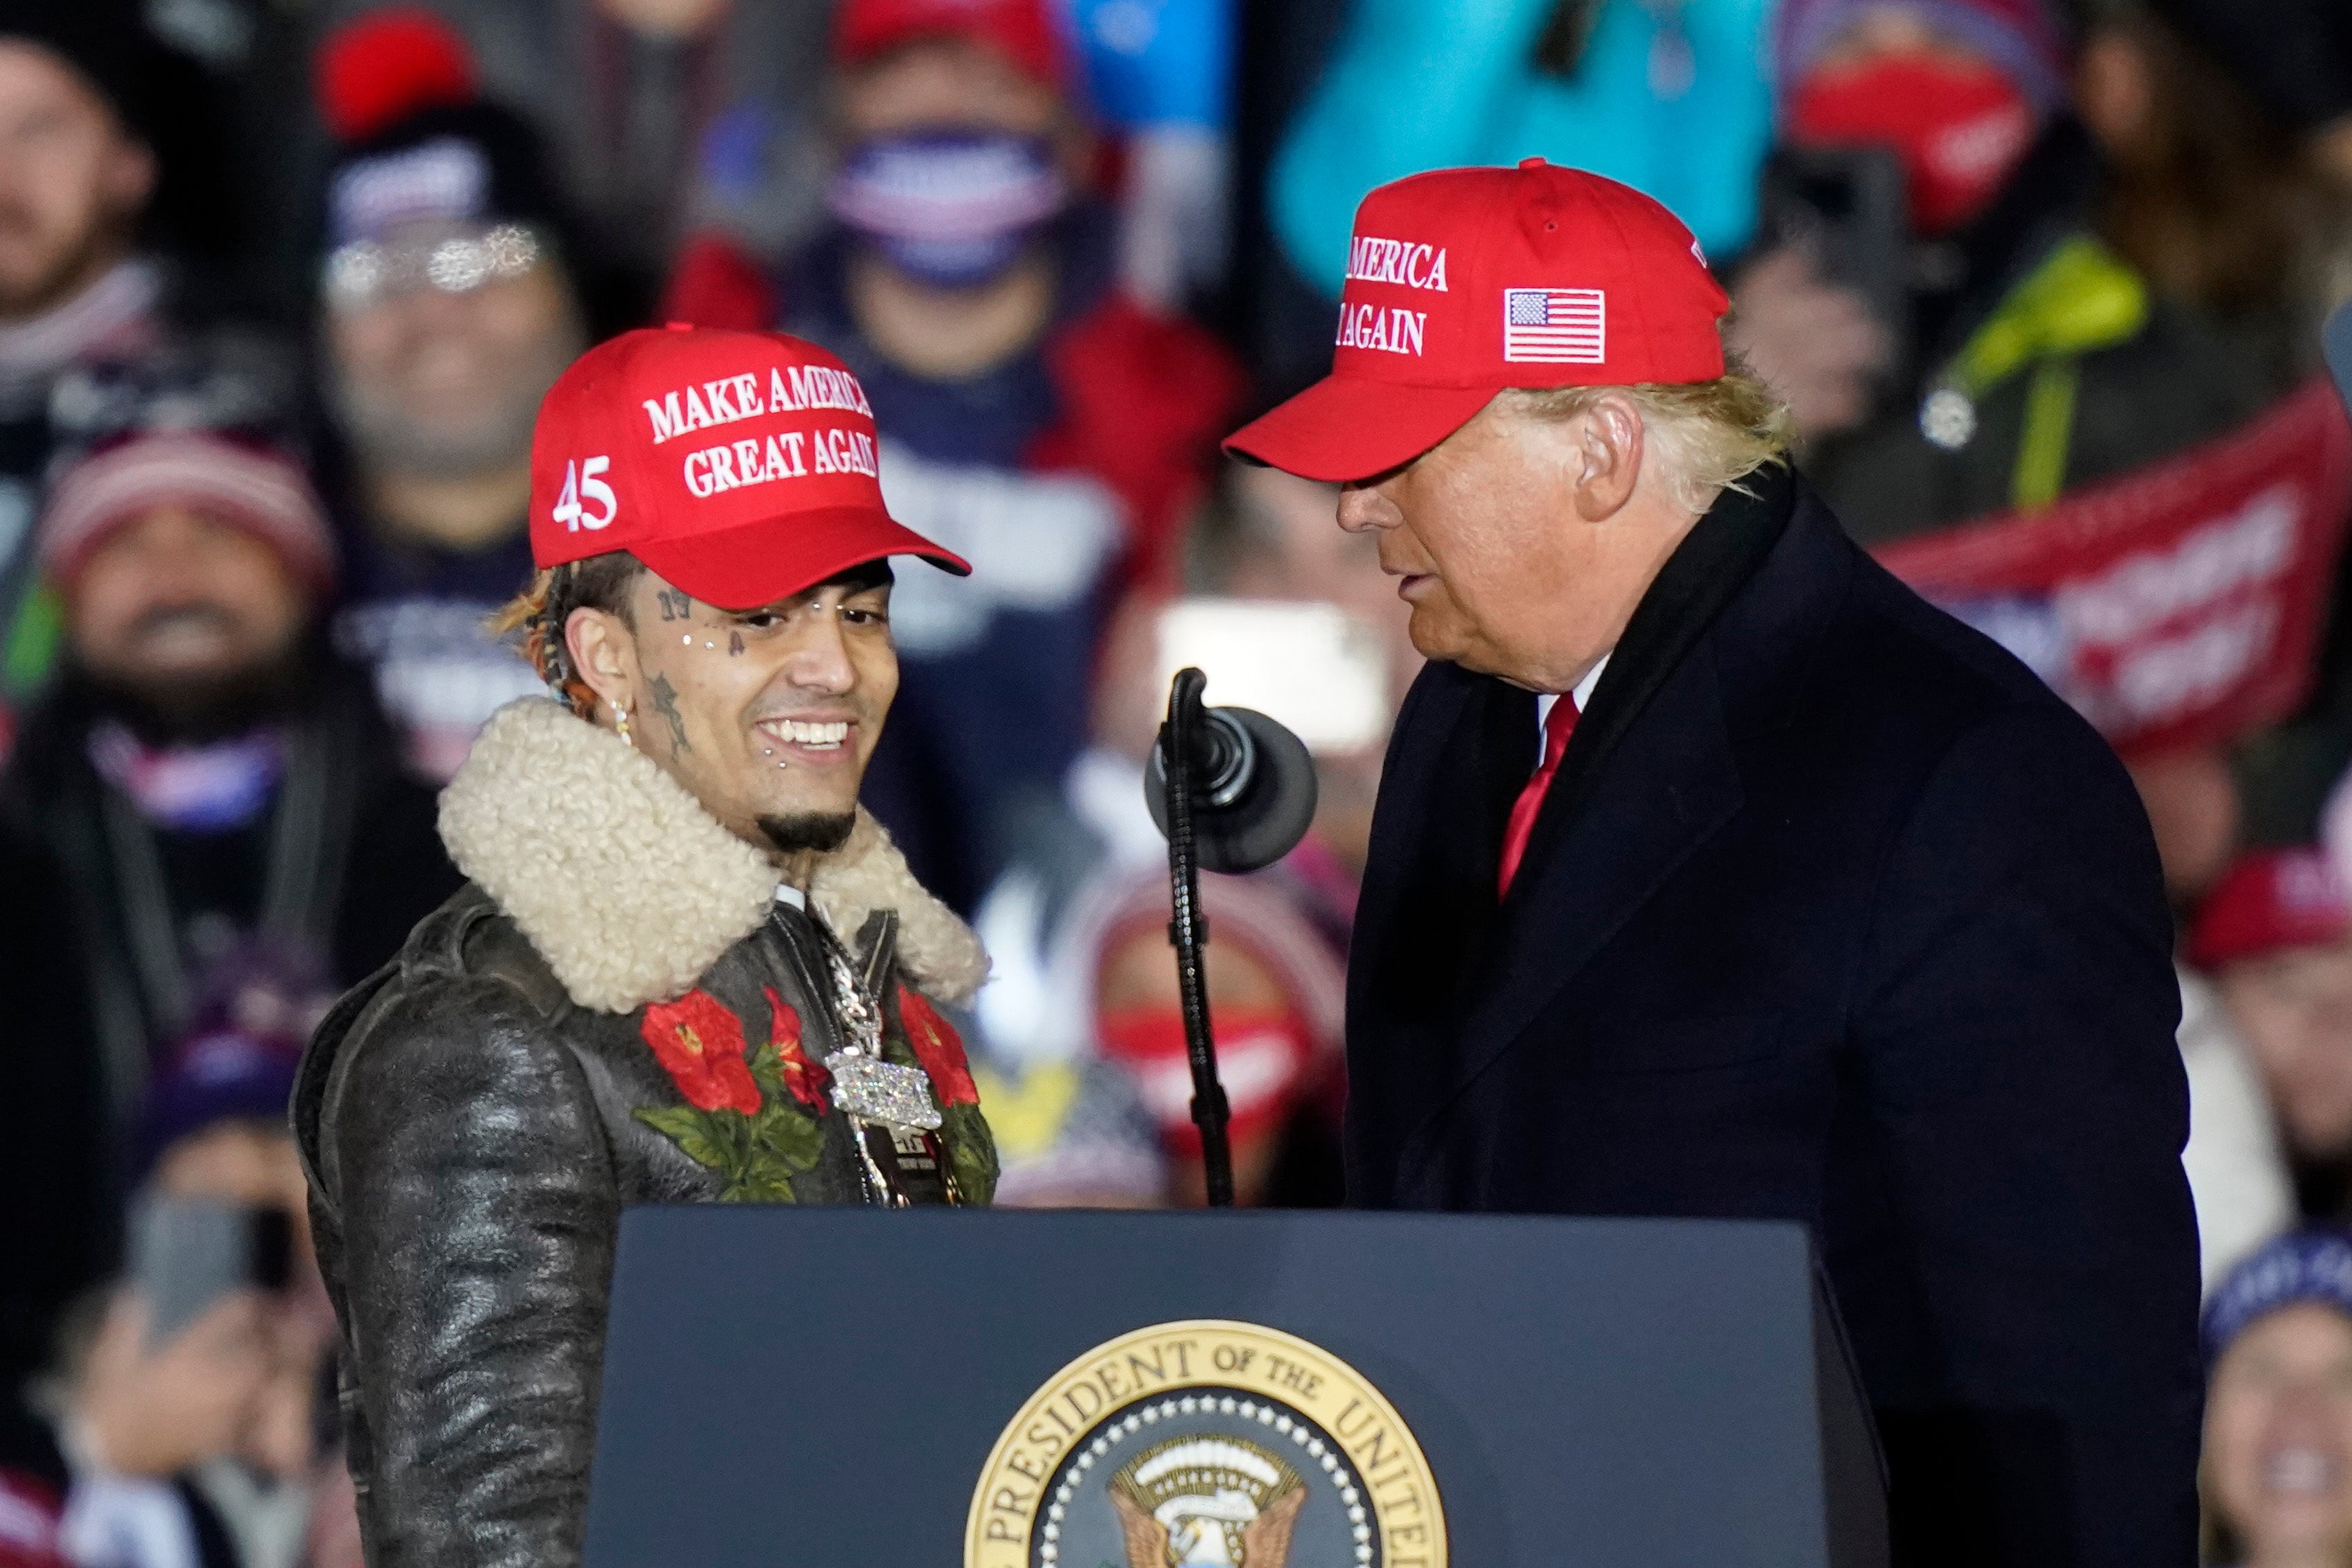 Lil Pump in his appearance on 3 Nov with Donald Trump said he appreciates what Mr Trump has done during his first term